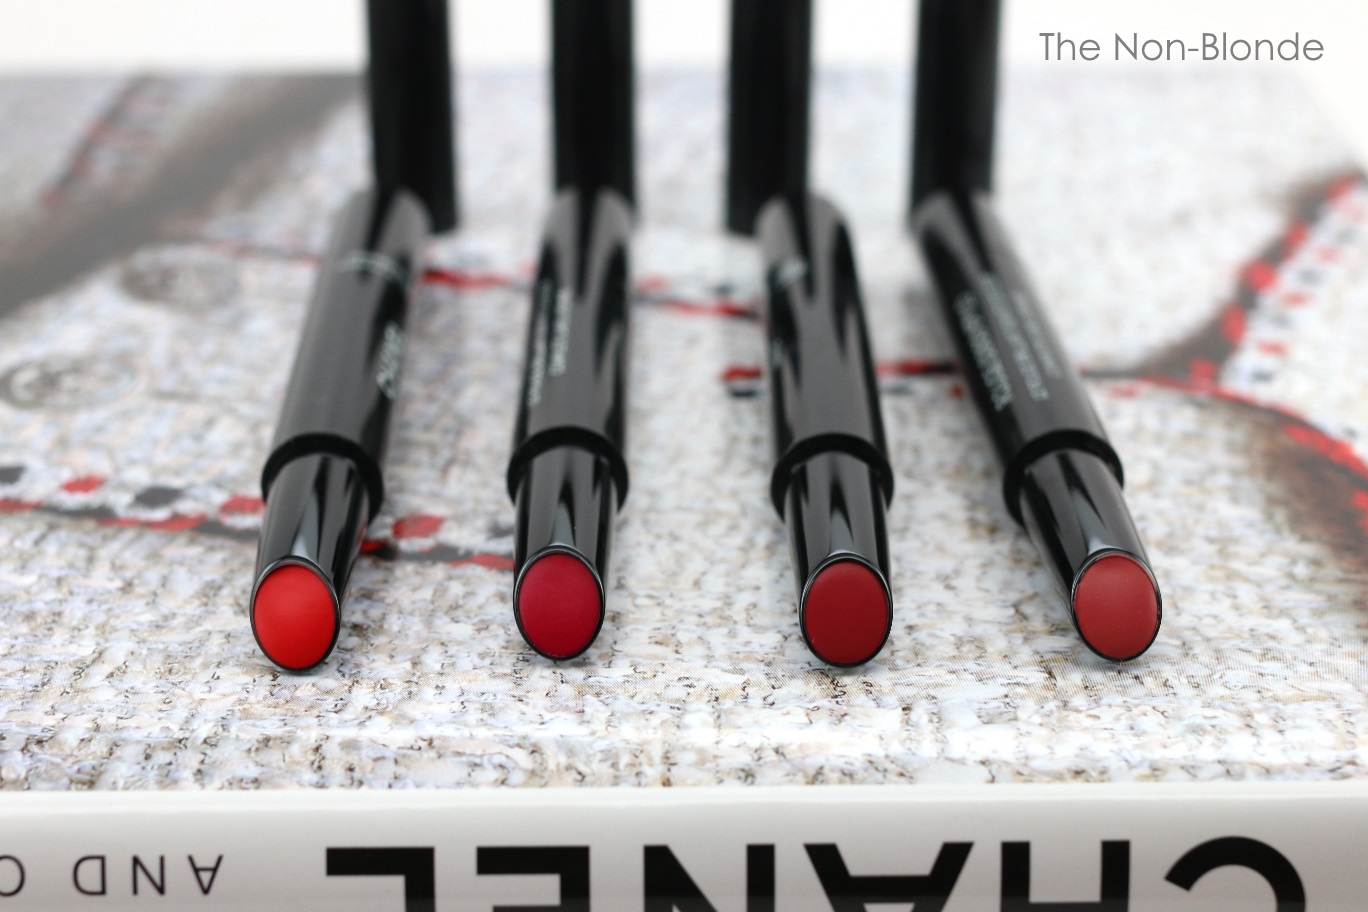 Chanel Rouge Coco Stylo in Conte #202 and Lettre #216 – Mtinc Beauty